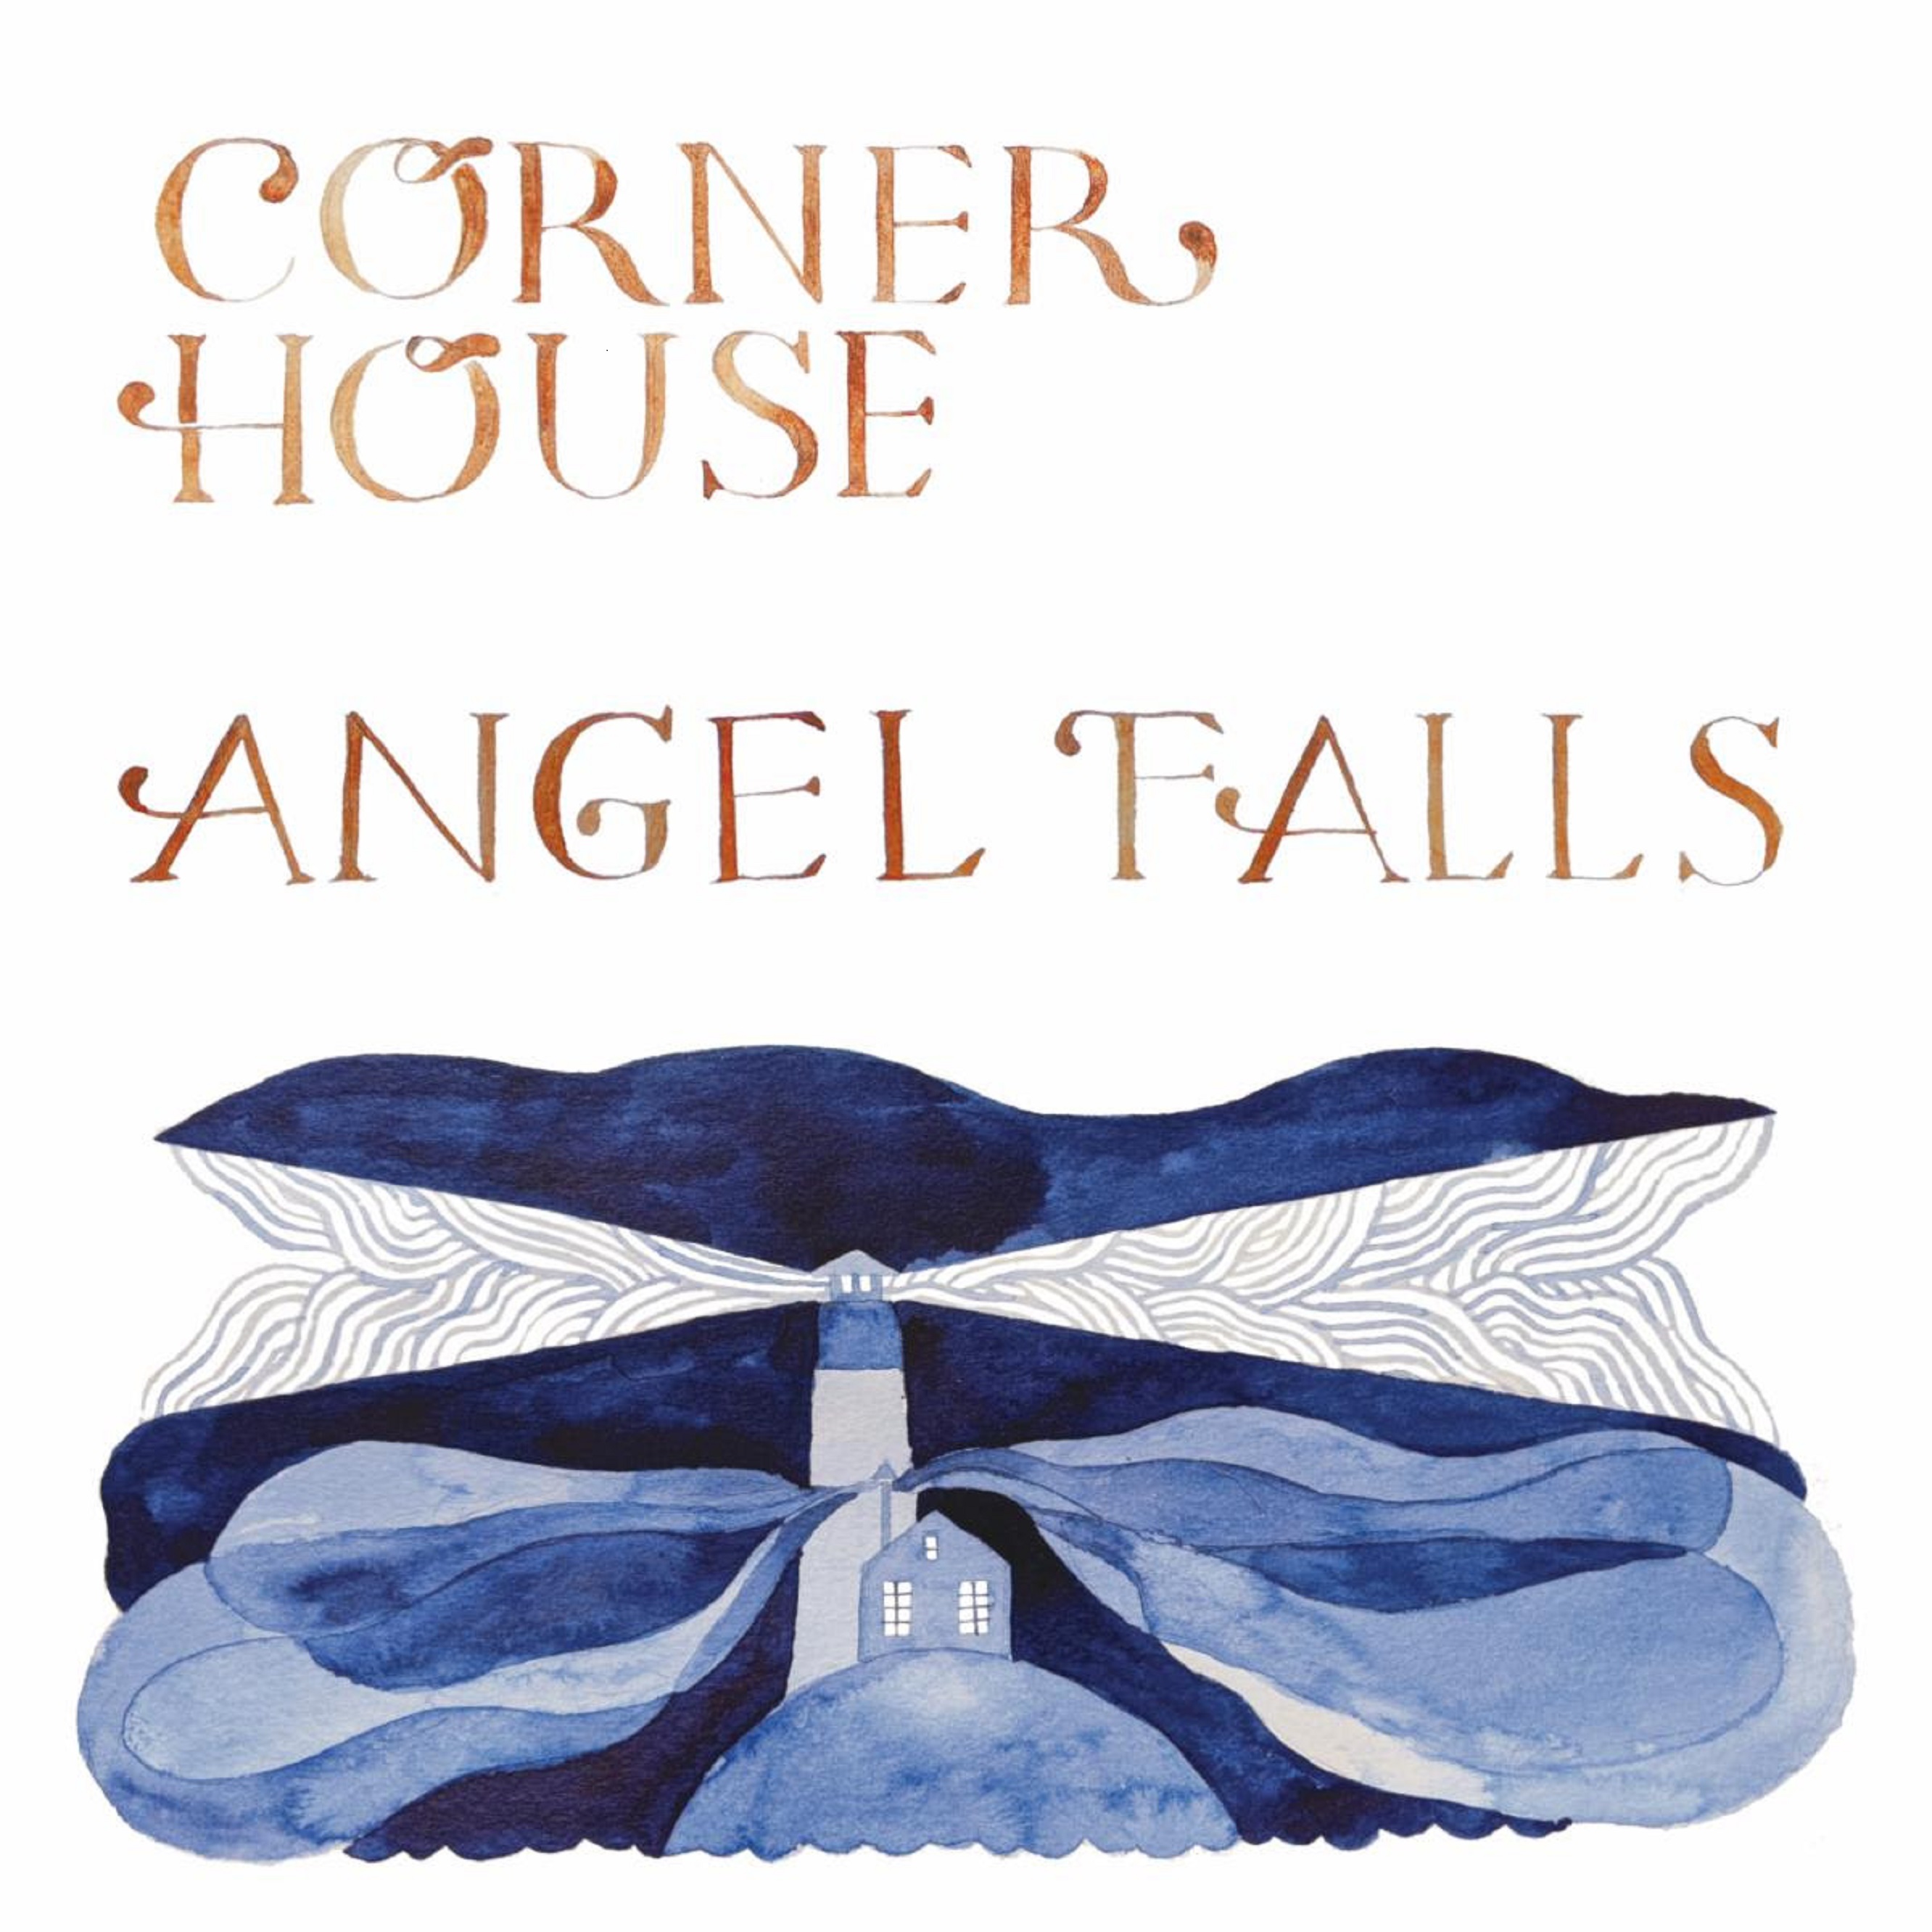 Acoustic Quartet Corner House Compile Their Collective Experience To Tell A Personal Story With “Angel Falls”